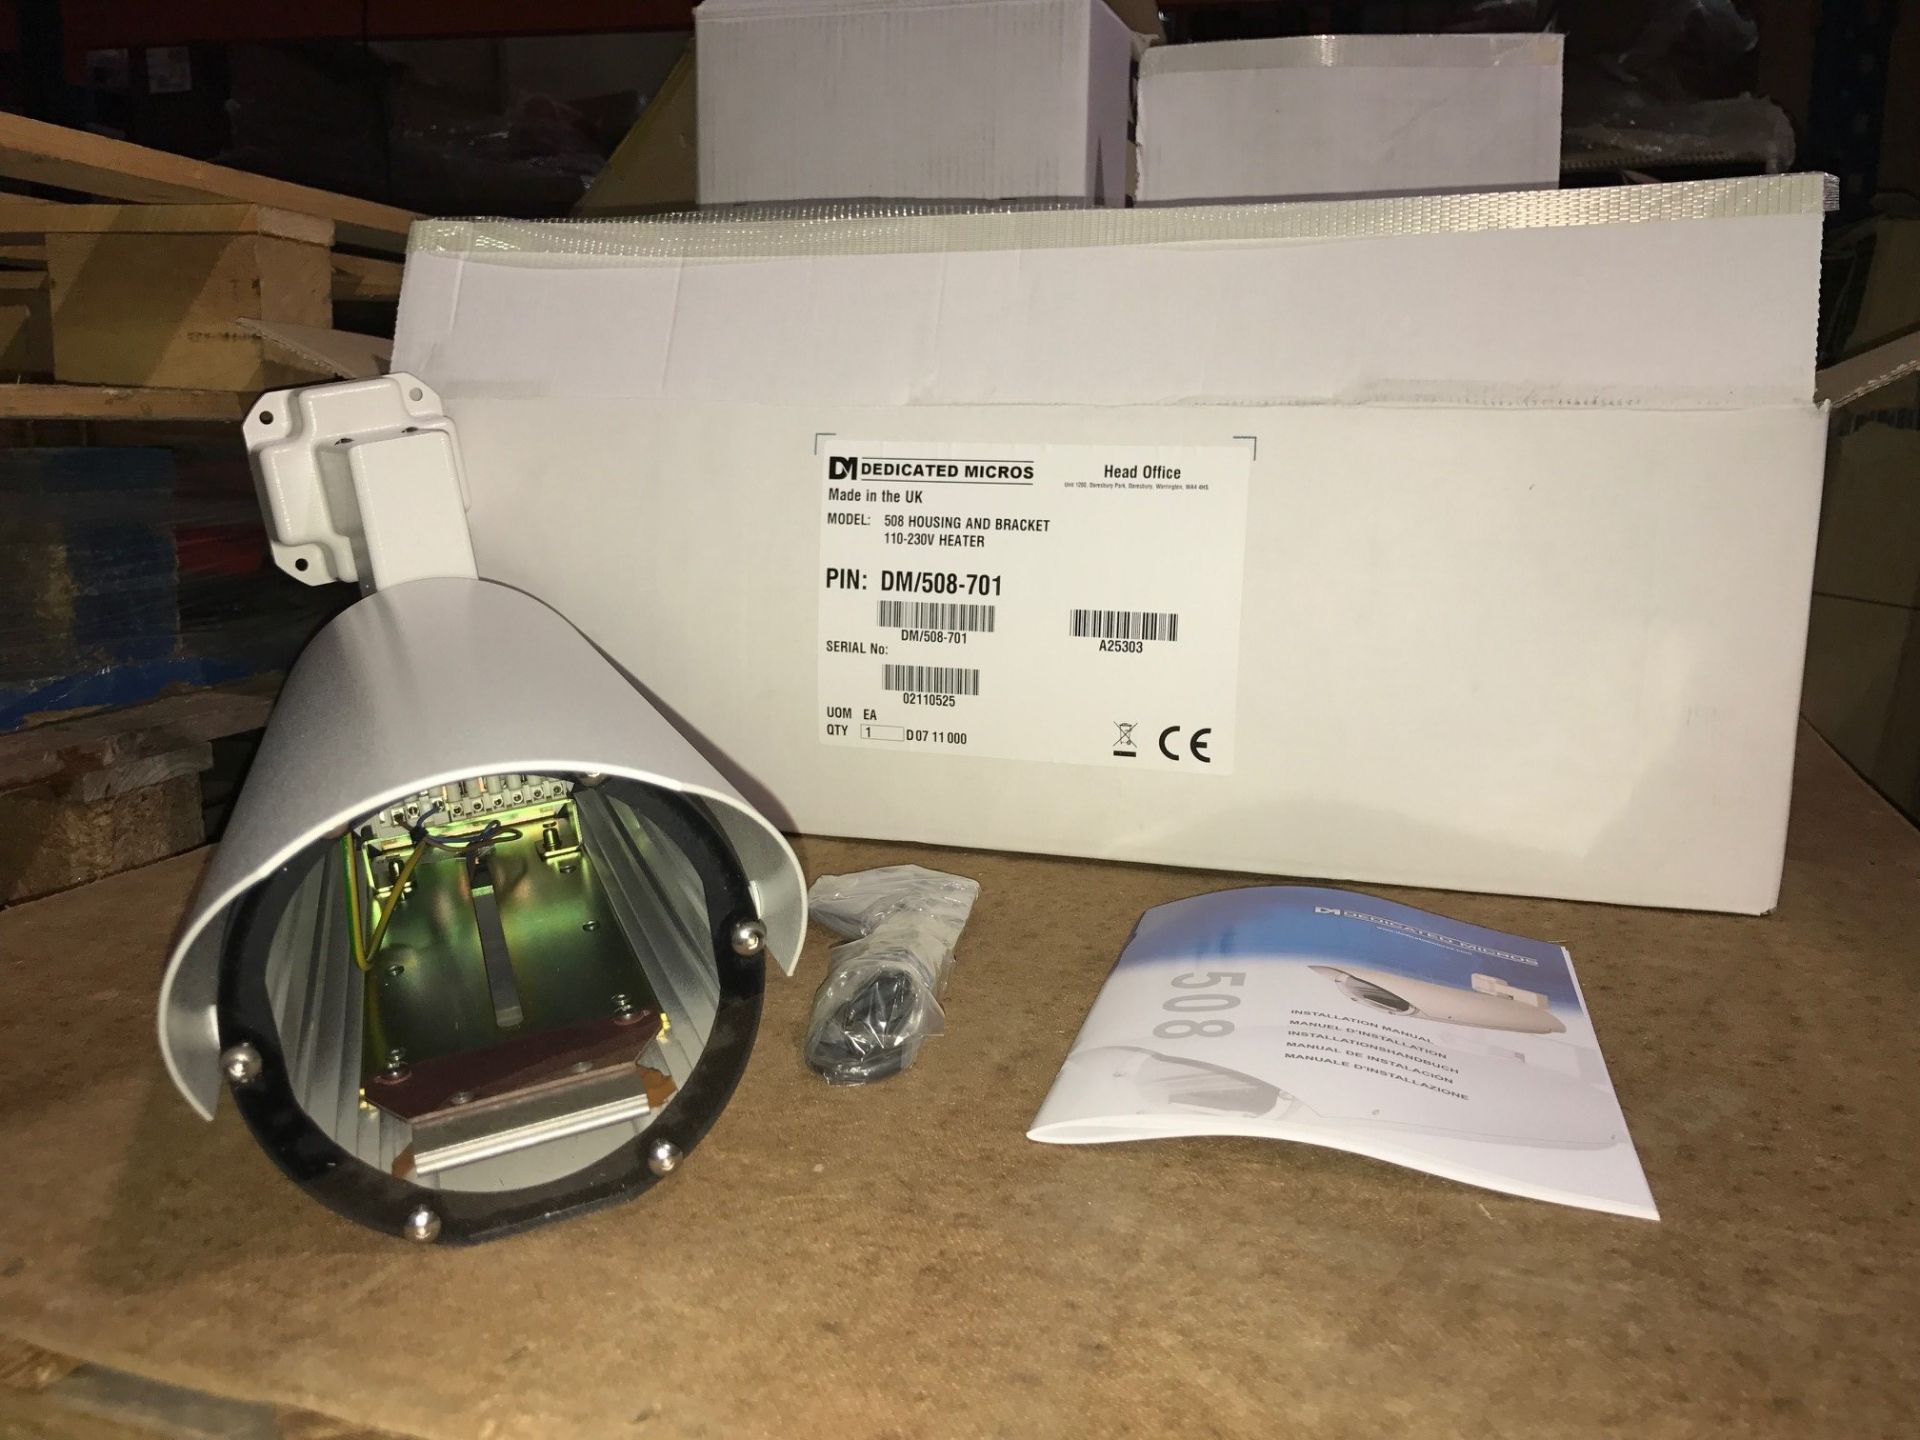 1 x Dedicated Micros DM/508-701 Housing and Bracket 110-230V Heater (Brand New & Boxed) - Image 2 of 5